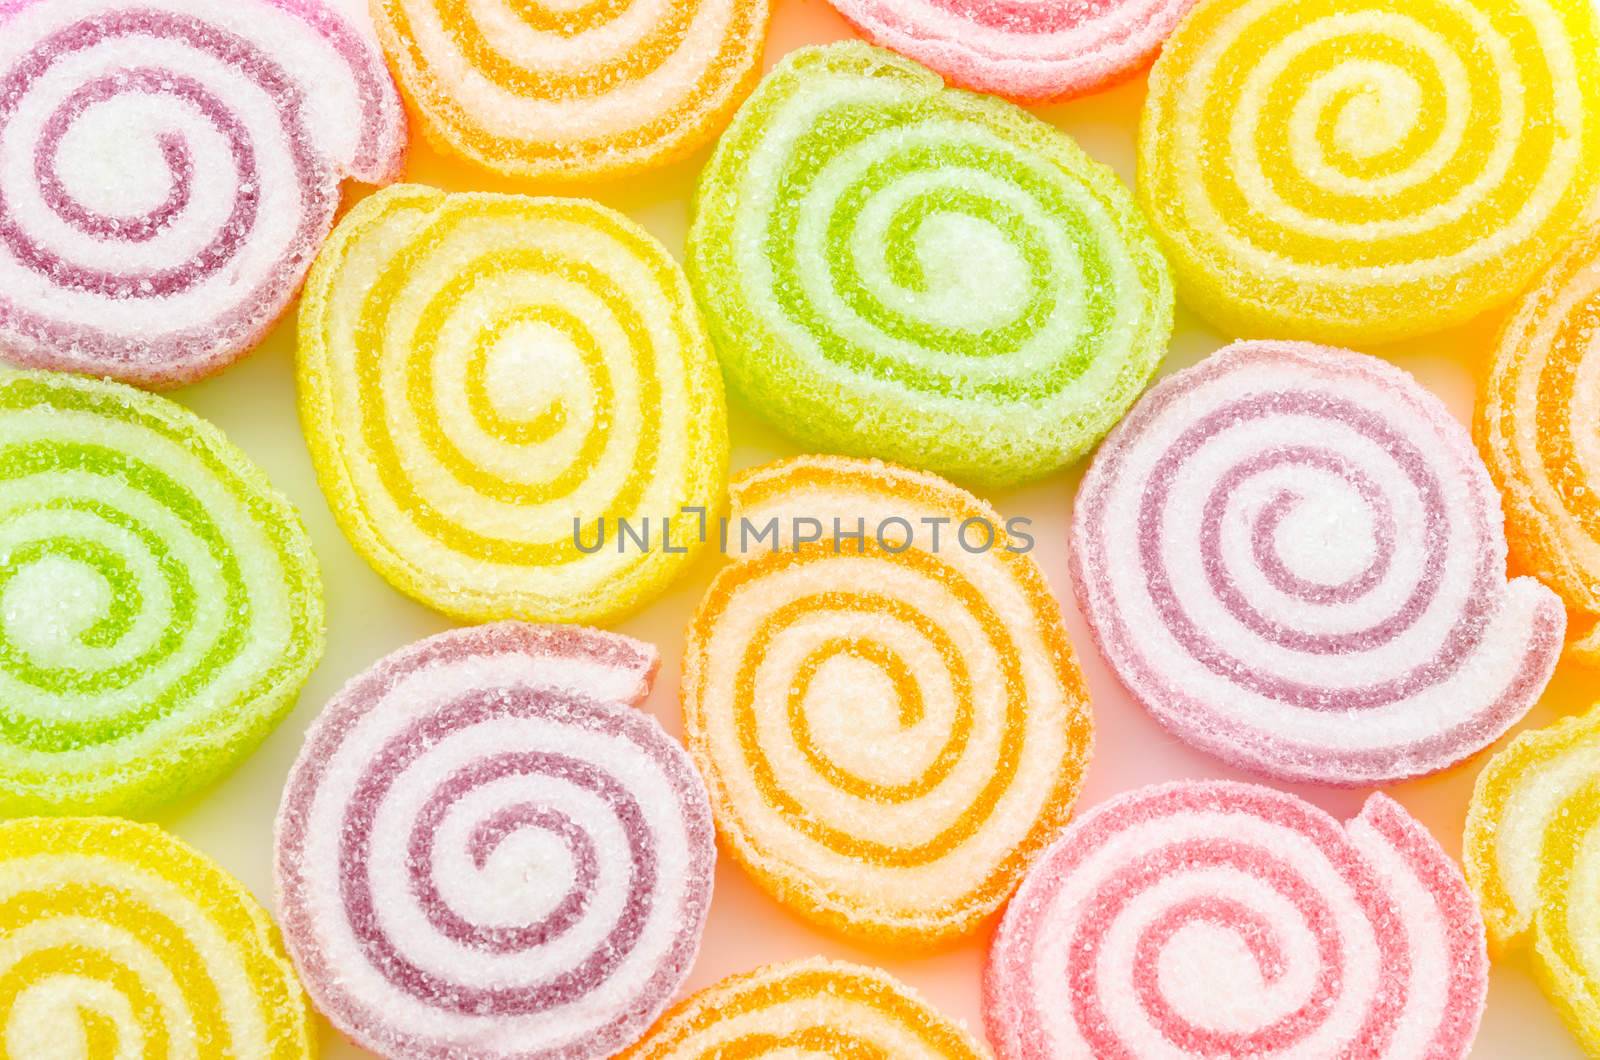 Jelly sweet, flavor fruit, candy dessert colorful as background.